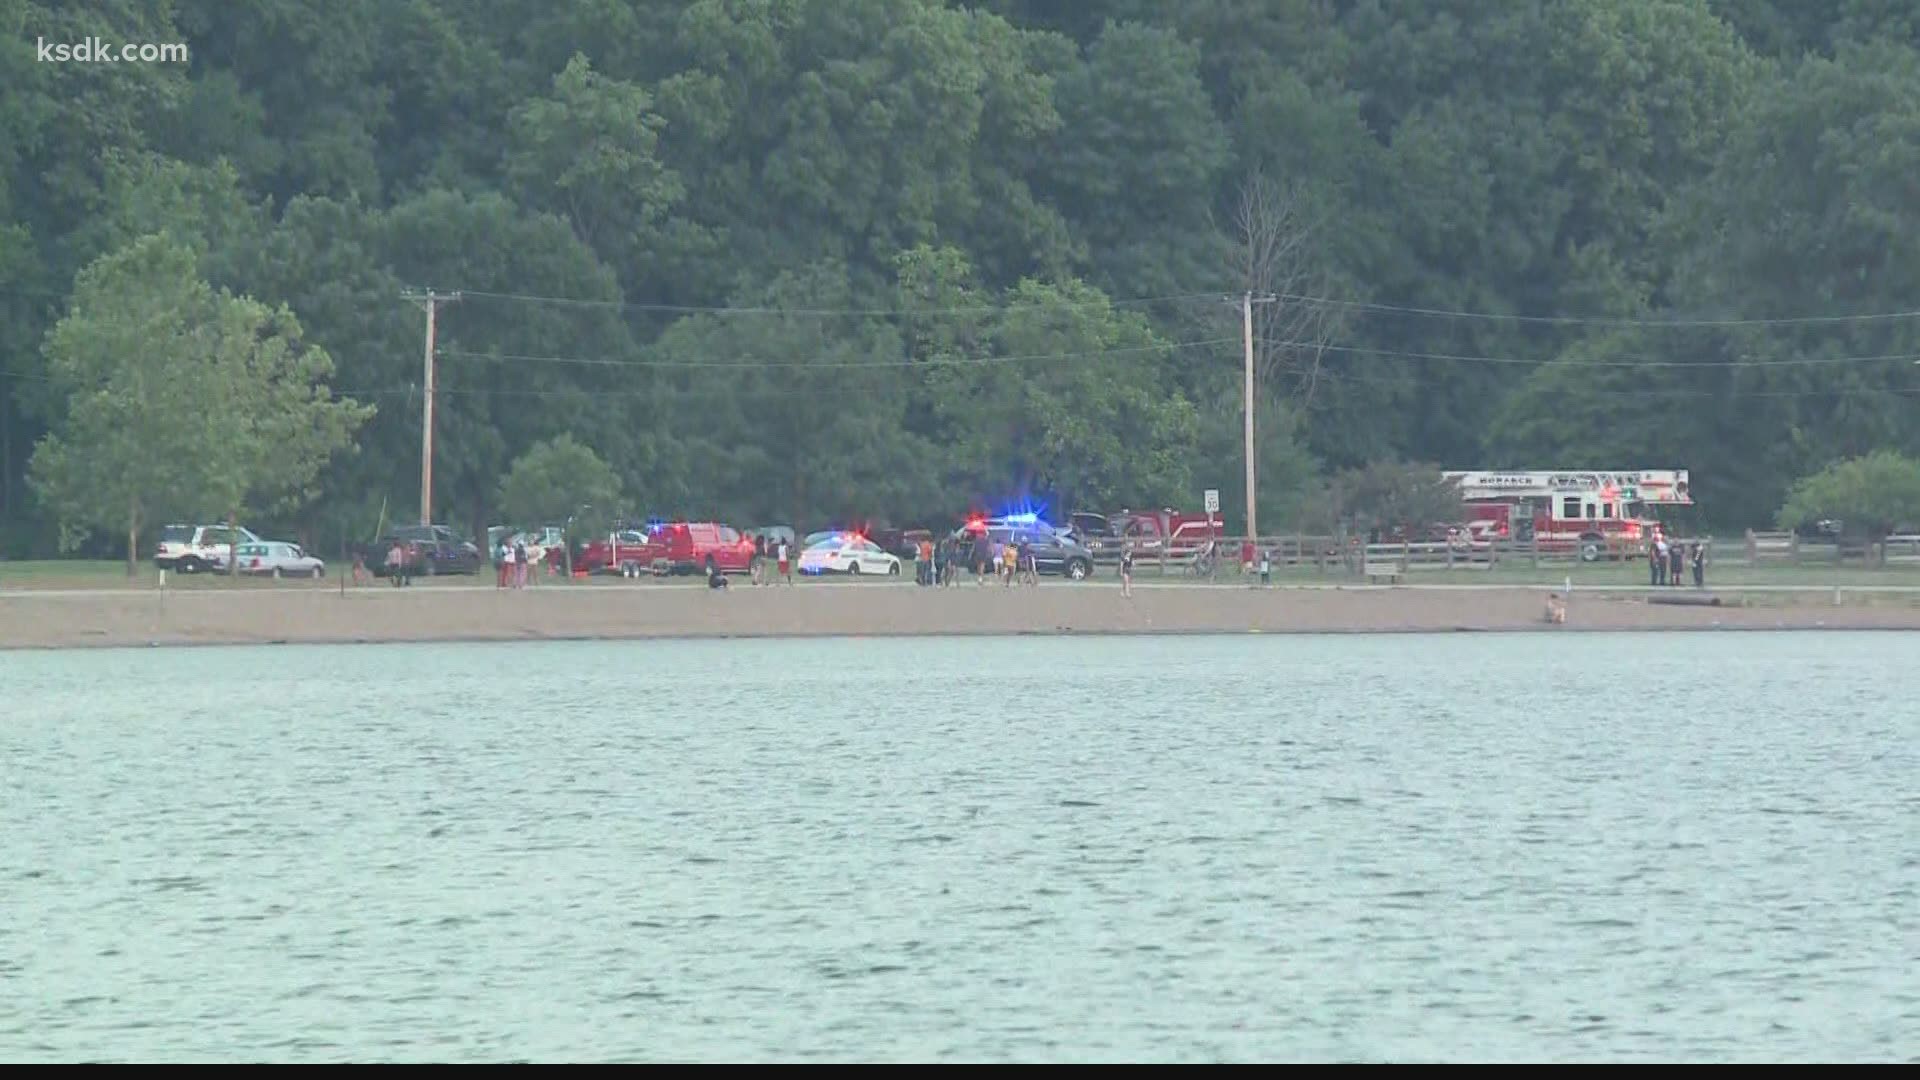 The boy's body was pulled from the lake at around 8:45, about an hour after he went under the water